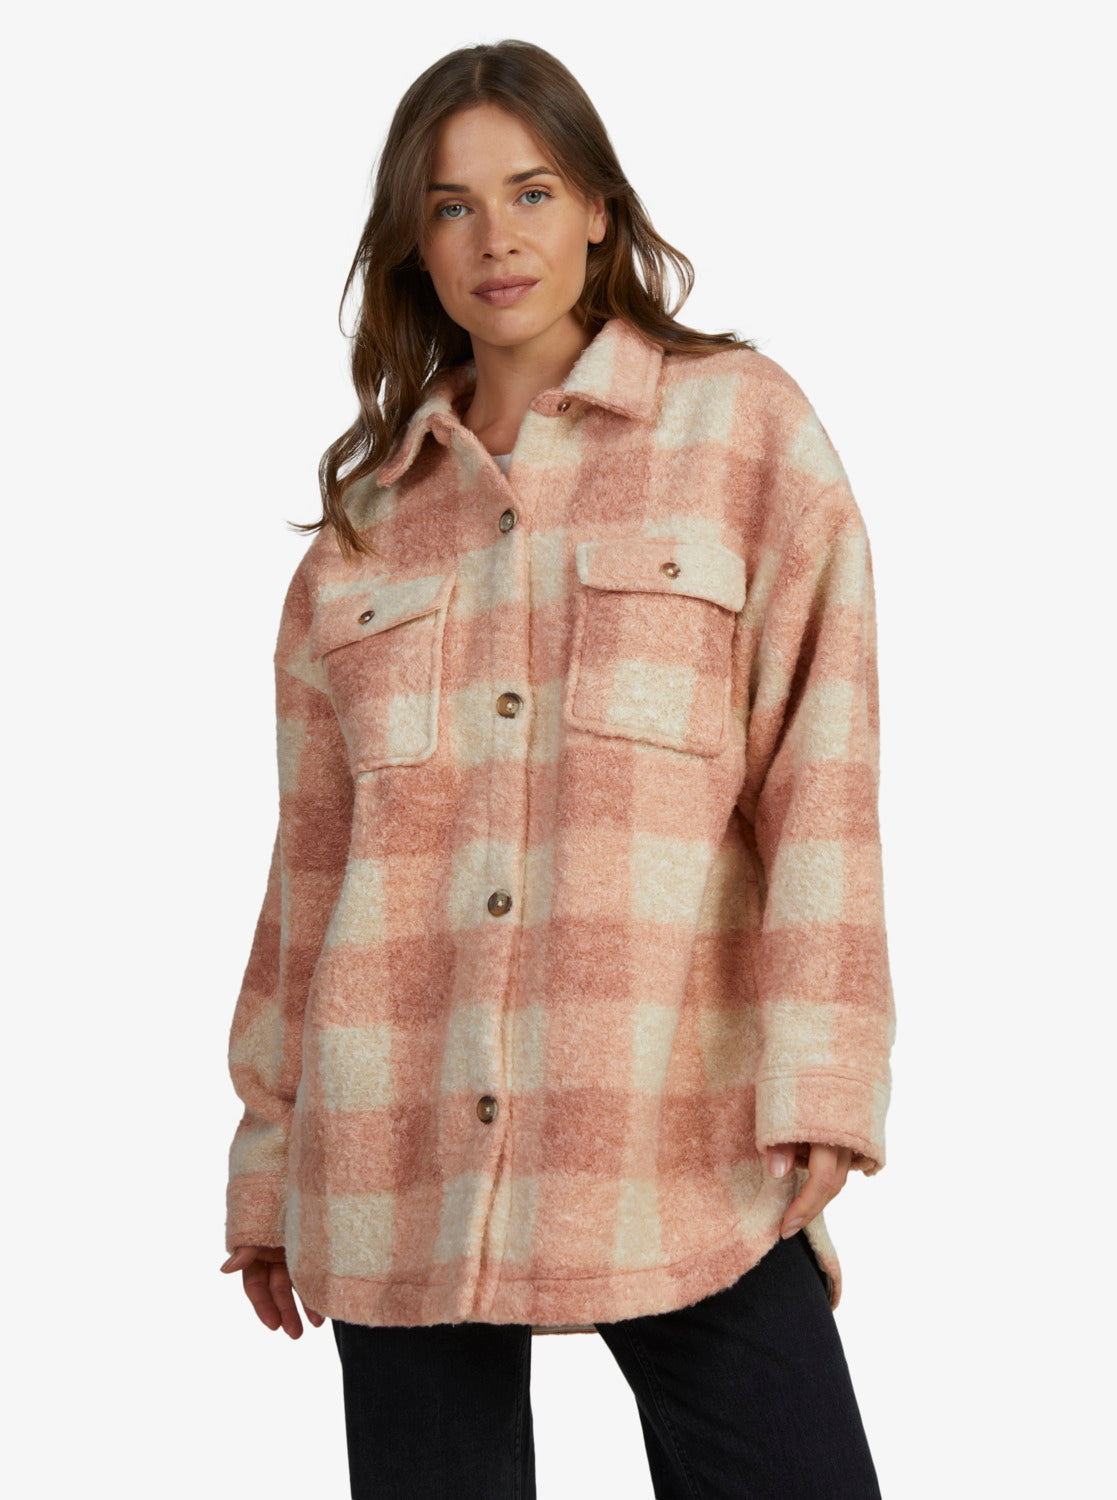 Over And Above Zip-Up Fleece - Paradiso Plaid Cafe Creme – Roxy.com